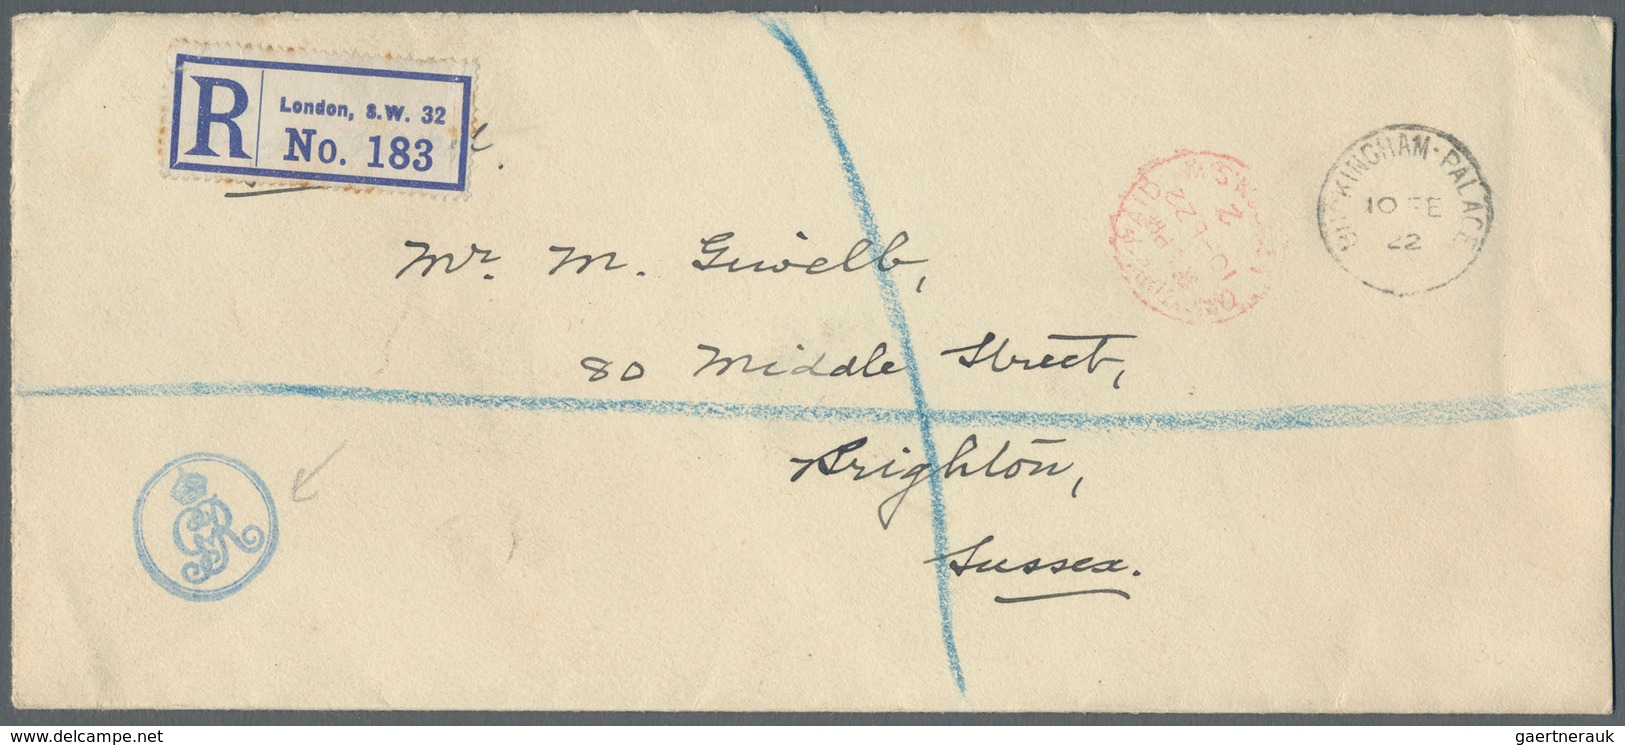 Großbritannien - Besonderheiten: 1903/1991: 36 letters only with OFFICIAL PAID cancellations.